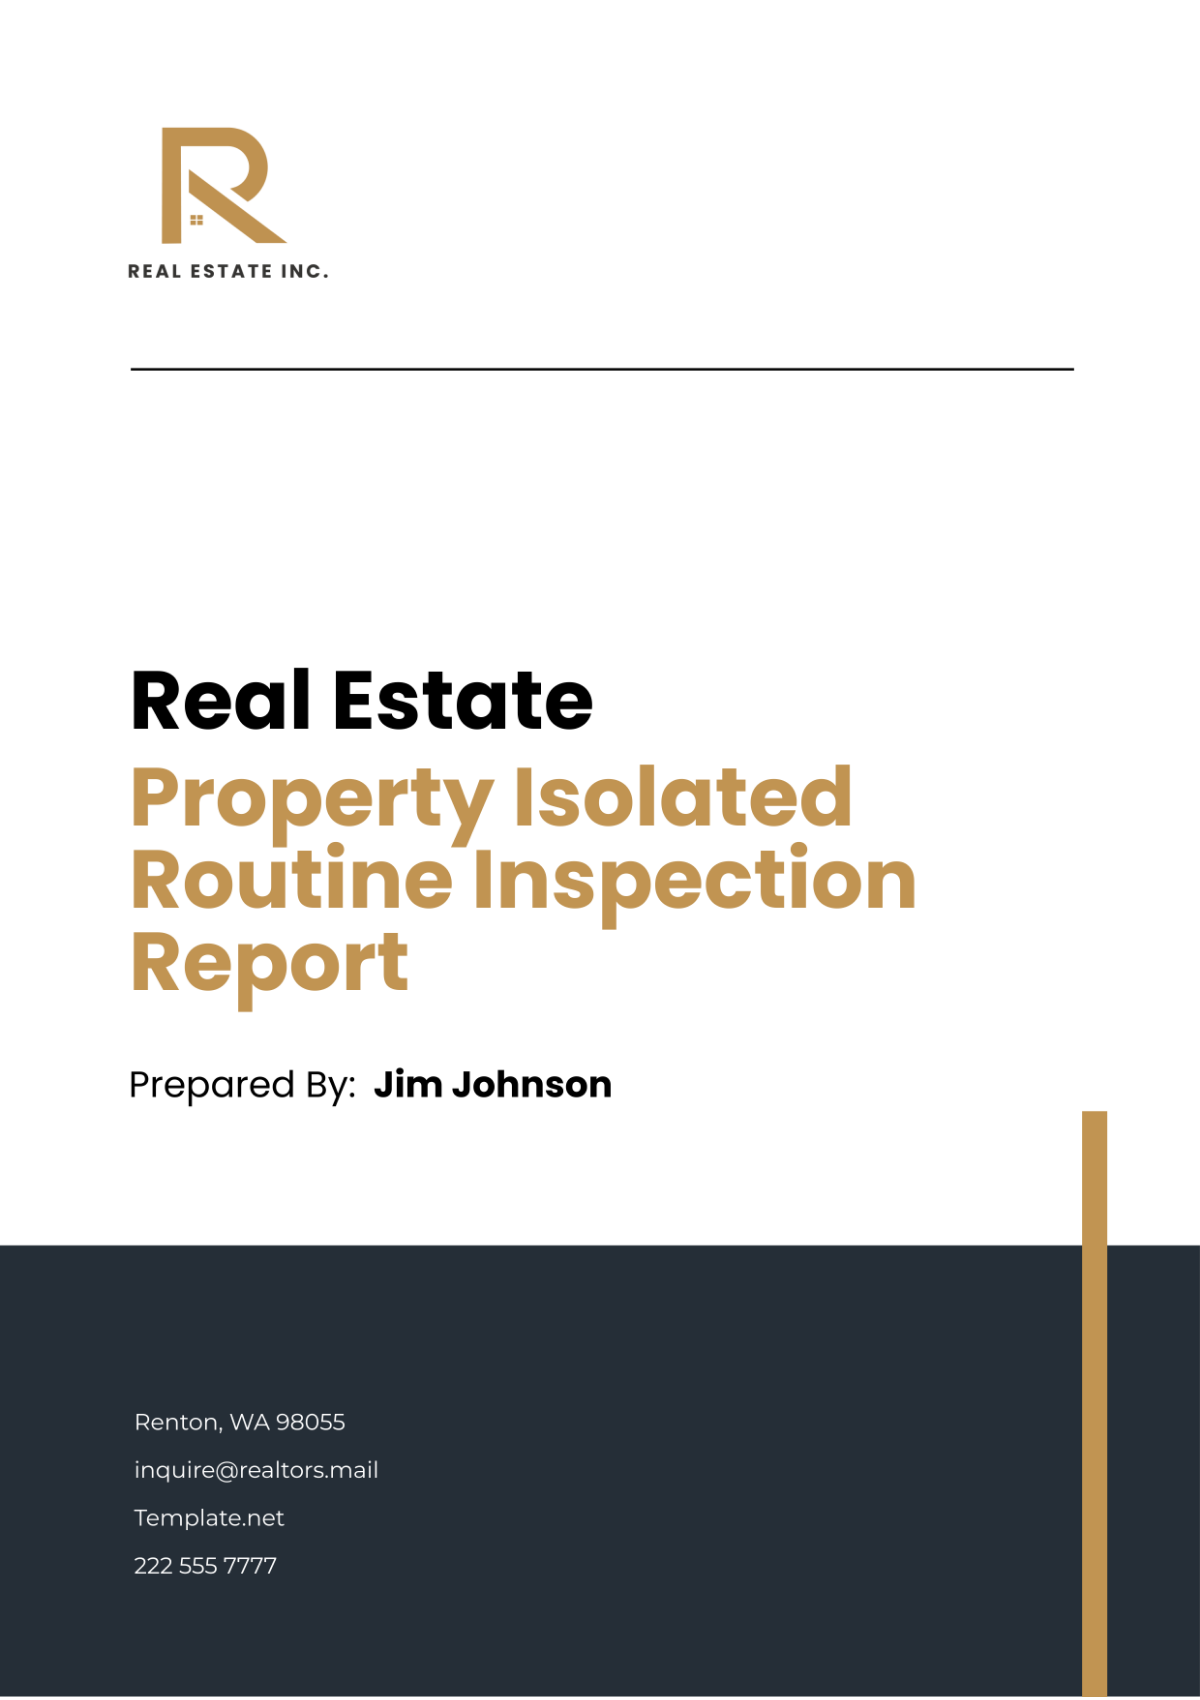 Free Real Estate Property Isolated Routine Inspection Report Template